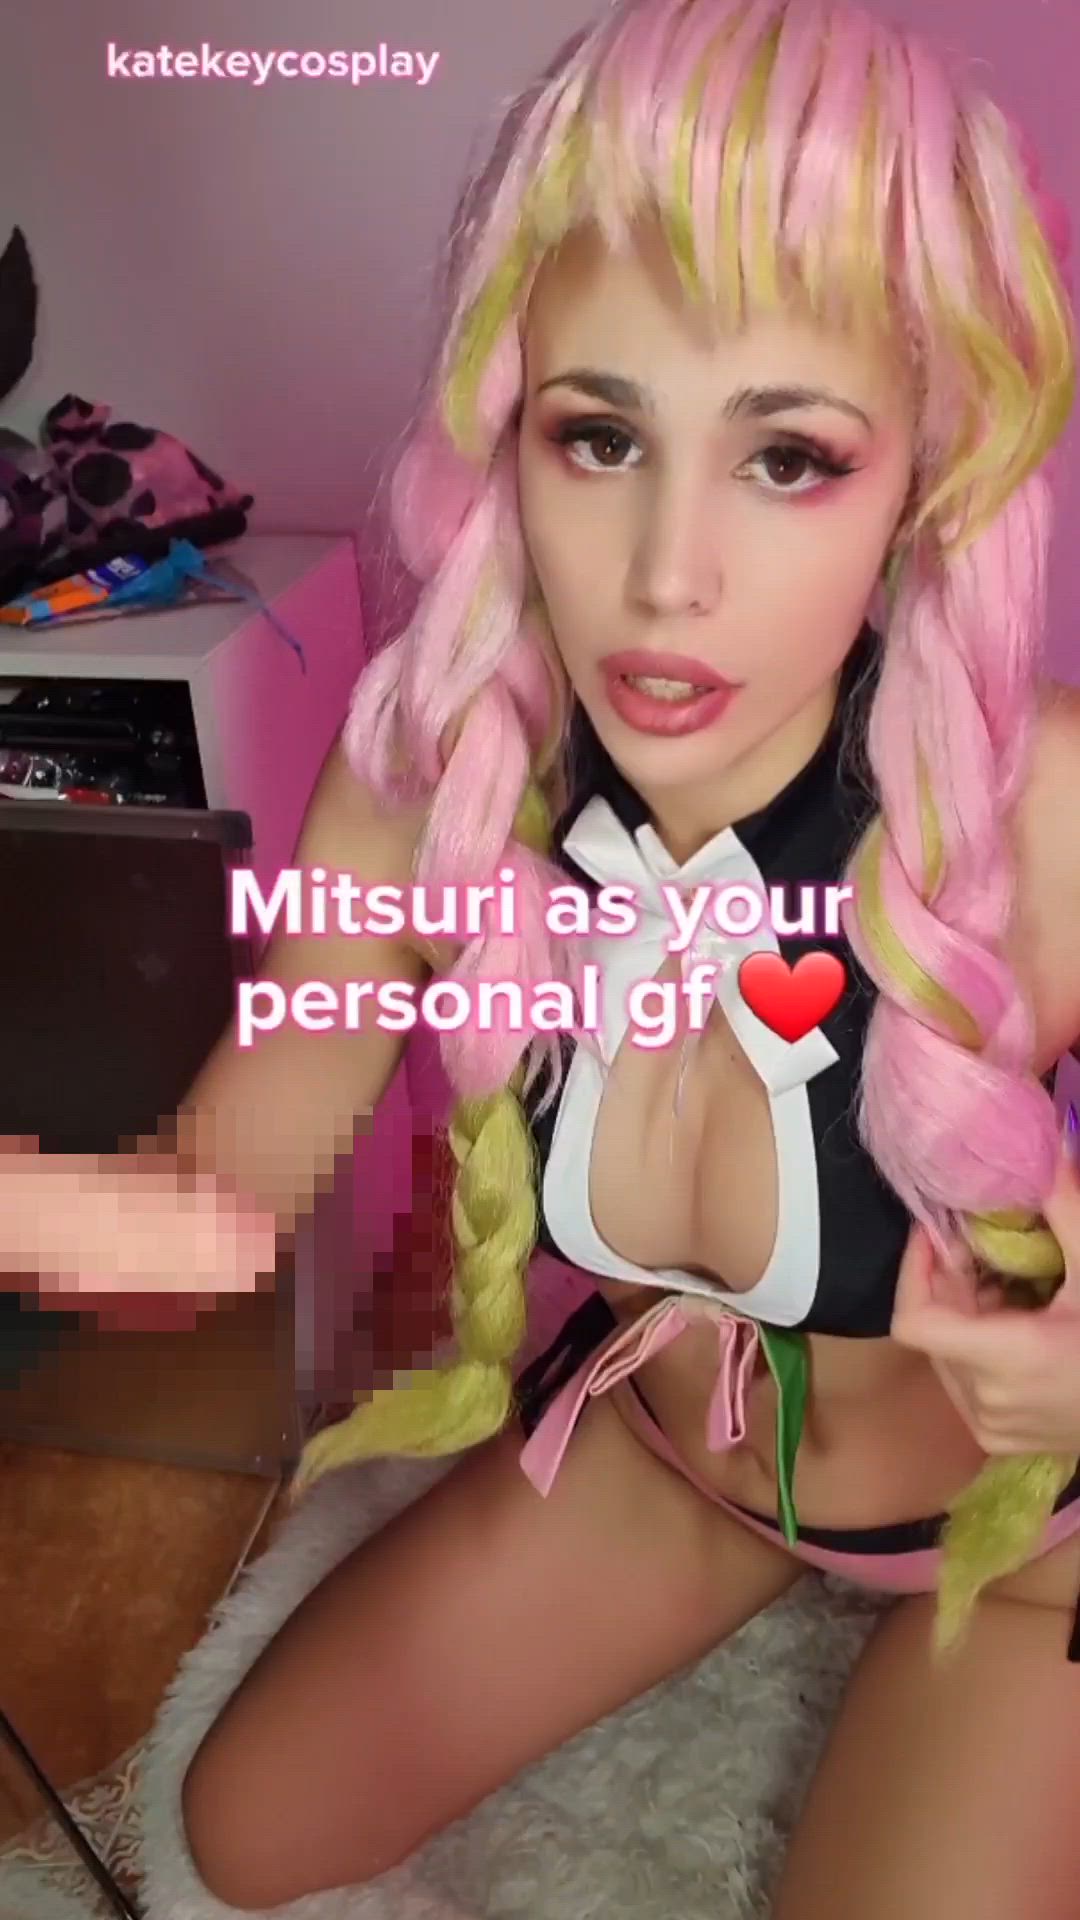 Blowjob porn video with onlyfans model Kate Key ❤️|| <strong>@katekeycosplay</strong>